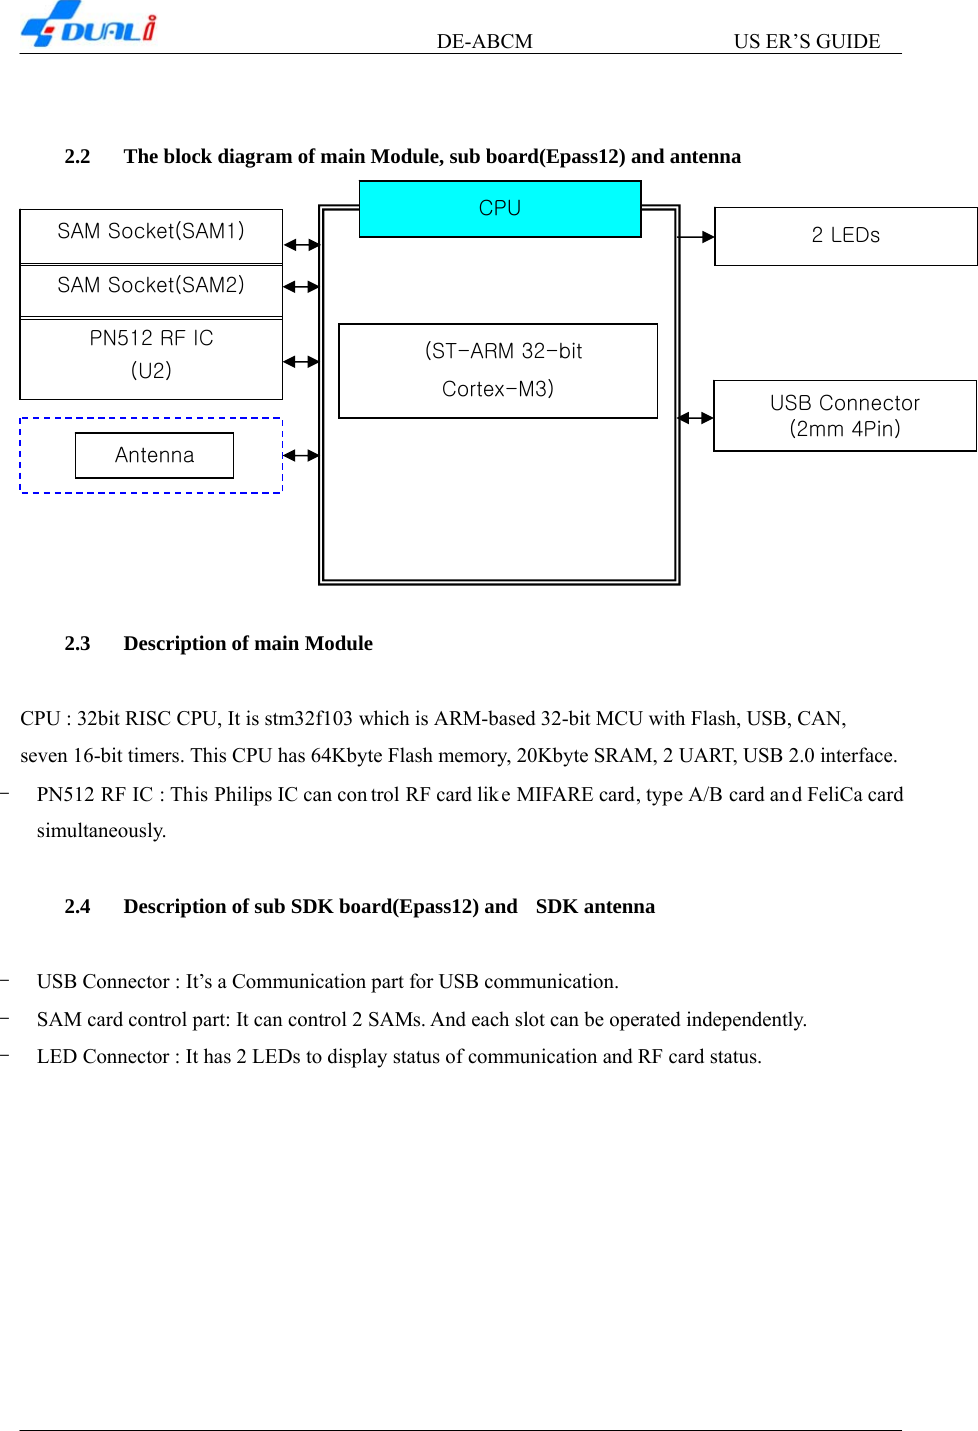       DE-ABCM          US ER’S GUIDE    2.2 The block diagram of main Module, sub board(Epass12) and antenna              PN512 RF IC (U2) SAM Socket(SAM1) SAM Socket(SAM2) Antenna (2mm 4Pin) USB Connector 2 LEDs     (ST-ARM 32-bit  Cortex-M3) CPU  2.3 Description of main Module   CPU : 32bit RISC CPU, It is stm32f103 which is ARM-based 32-bit MCU with Flash, USB, CAN, seven 16-bit timers. This CPU has 64Kbyte Flash memory, 20Kbyte SRAM, 2 UART, USB 2.0 interface. - PN512 RF IC : This Philips IC can con trol RF card like MIFARE card, type A/B card an d FeliCa card  simultaneously.   2.4 Description of sub SDK board(Epass12) and   SDK antenna   - USB Connector : It’s a Communication part for USB communication.   - SAM card control part: It can control 2 SAMs. And each slot can be operated independently. - LED Connector : It has 2 LEDs to display status of communication and RF card status. 